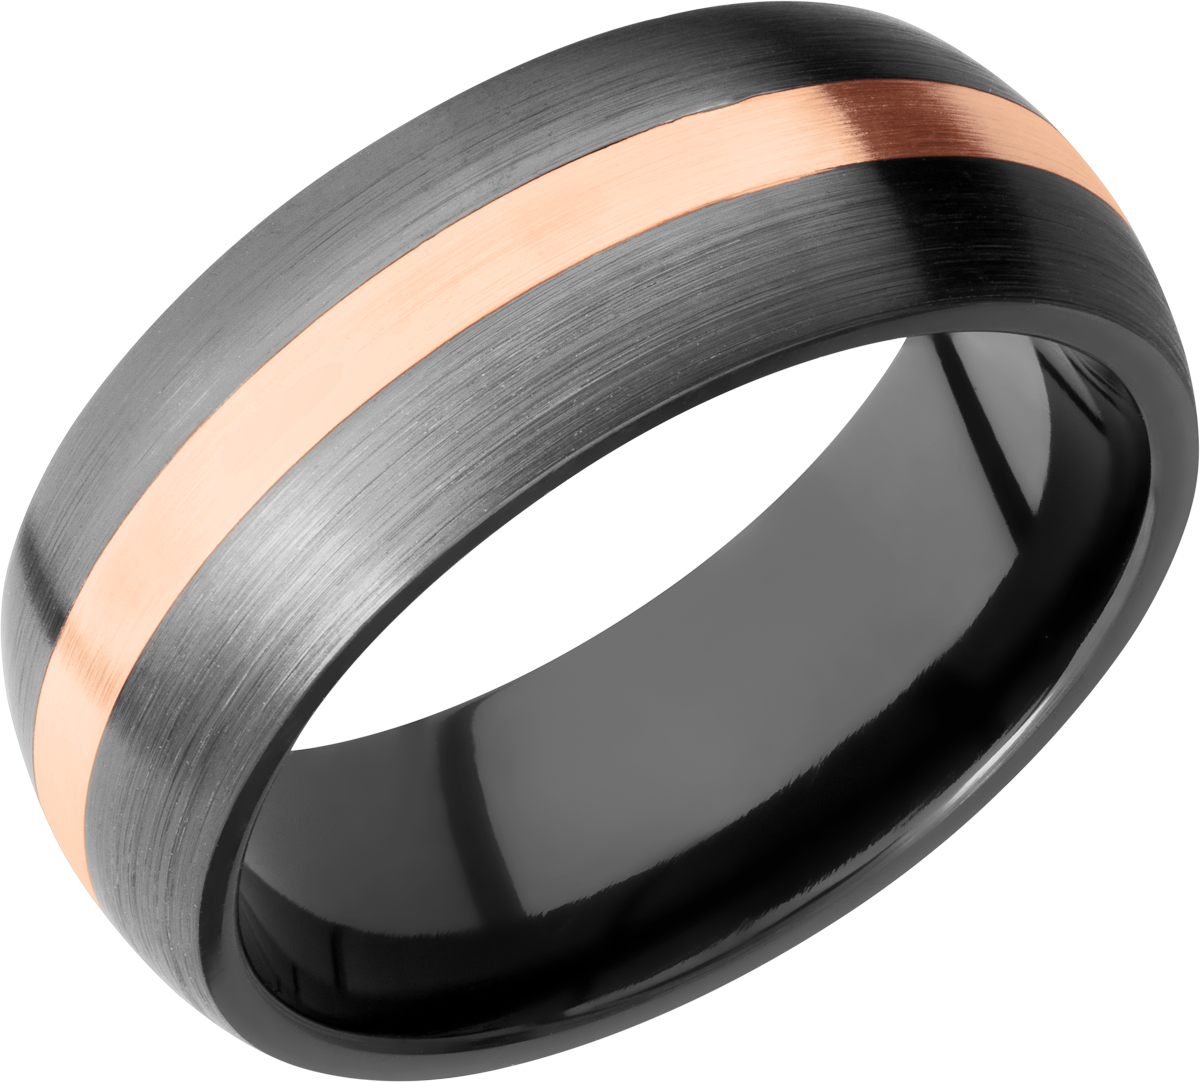 Black zirconium 8mm domed band with one inlay that is 2mm wide of 14k rose gold. SATIN/SATIN